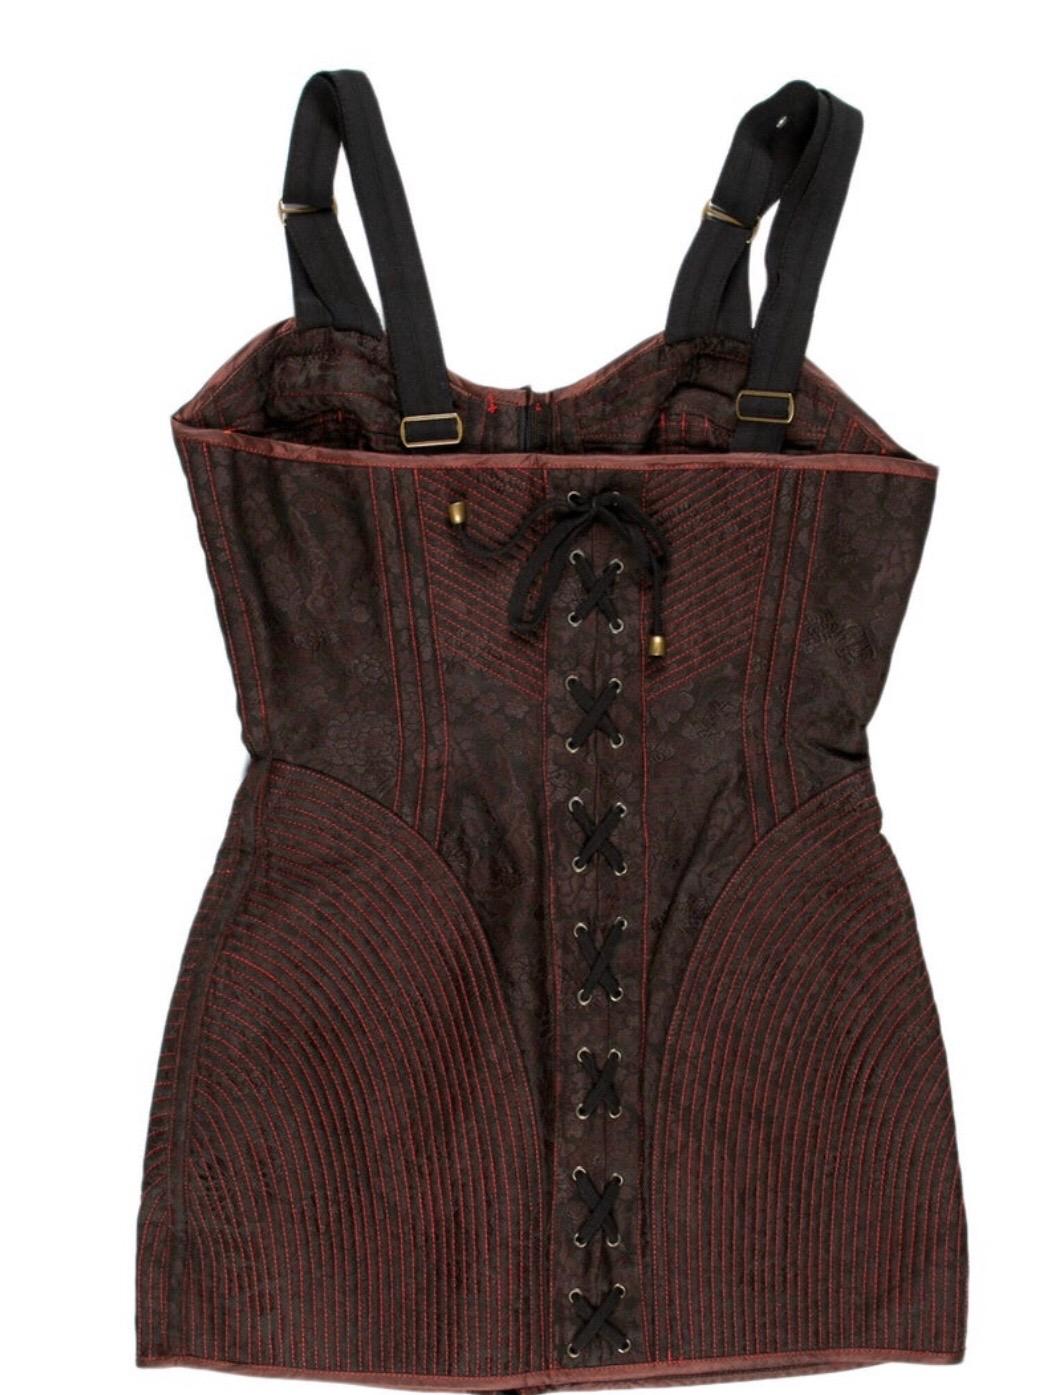 Jean Paul Gaultier maroon and black floral mini dress with lace up back and hook eye front and quiltiing. Condition: Excellent. 
Size S/ US 4
28